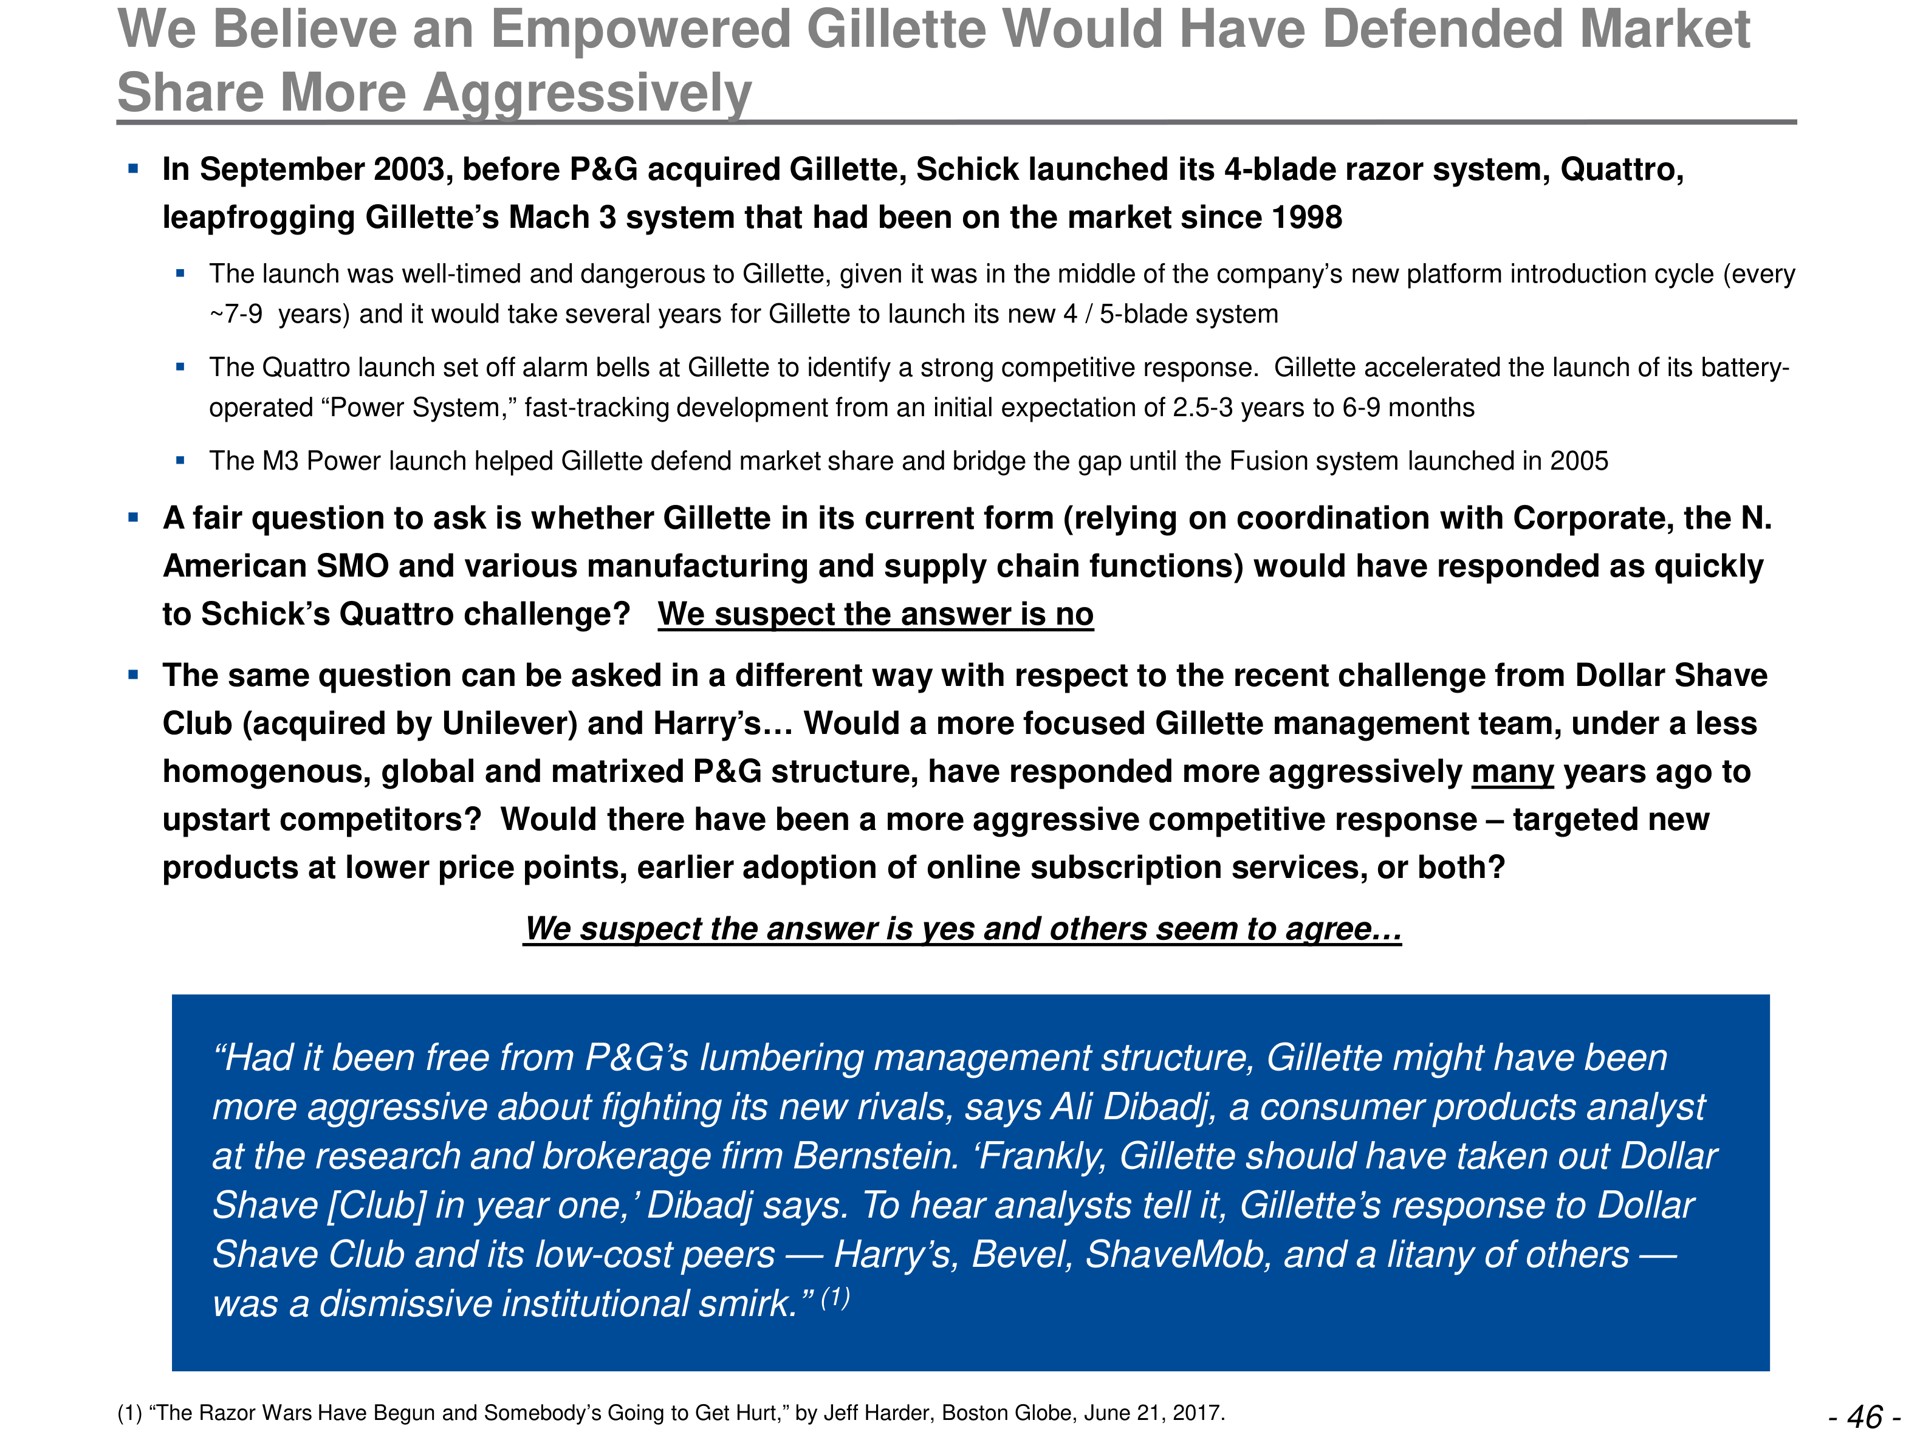 we believe an empowered would have defended market share more aggressively | Trian Partners